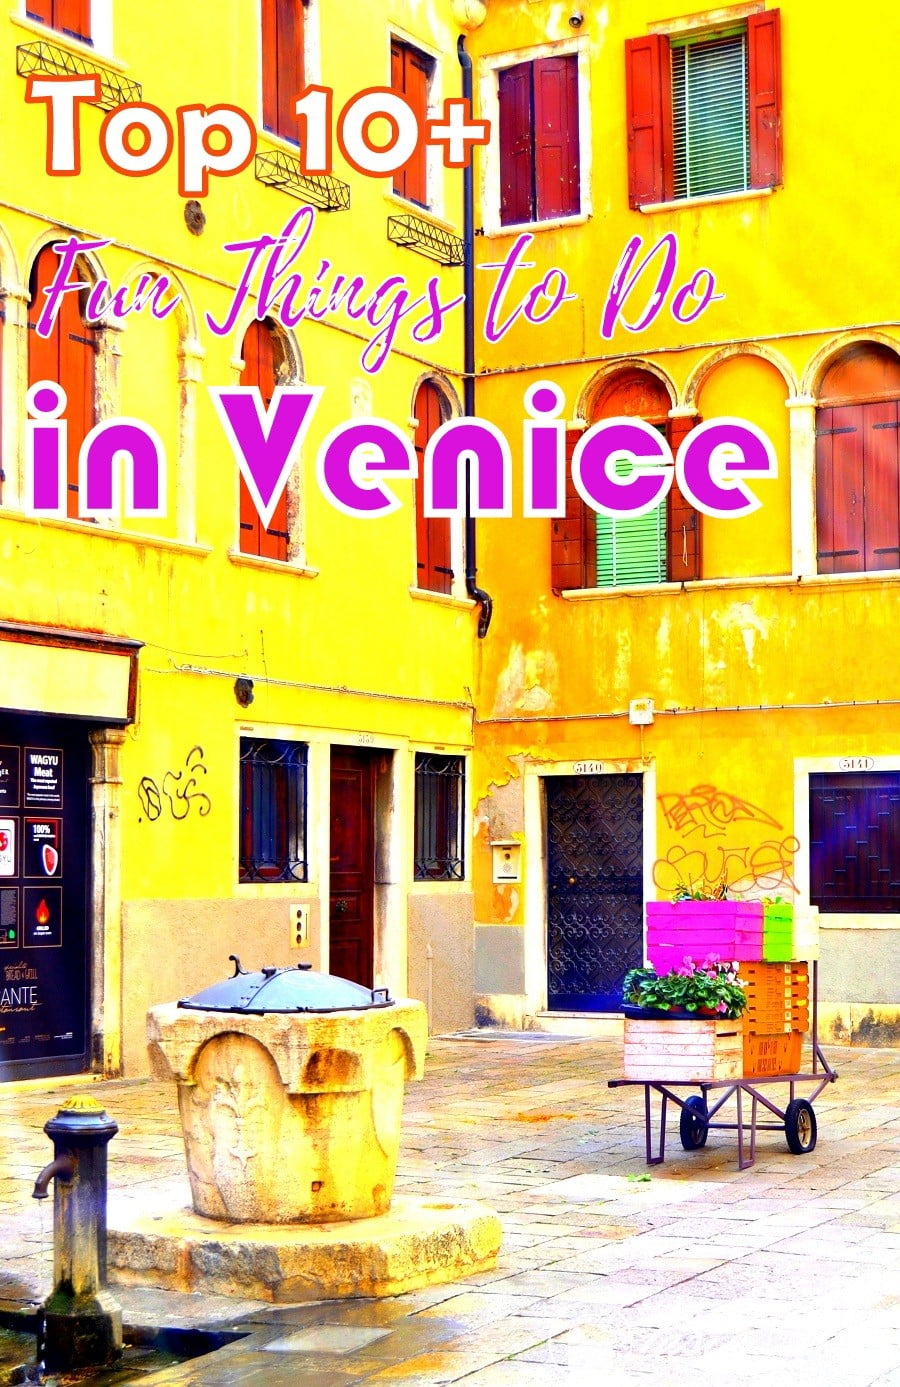 Check out the top 10 fun #ThingsToDo in #Venice, #Italy #travel #photography @tasteontheway